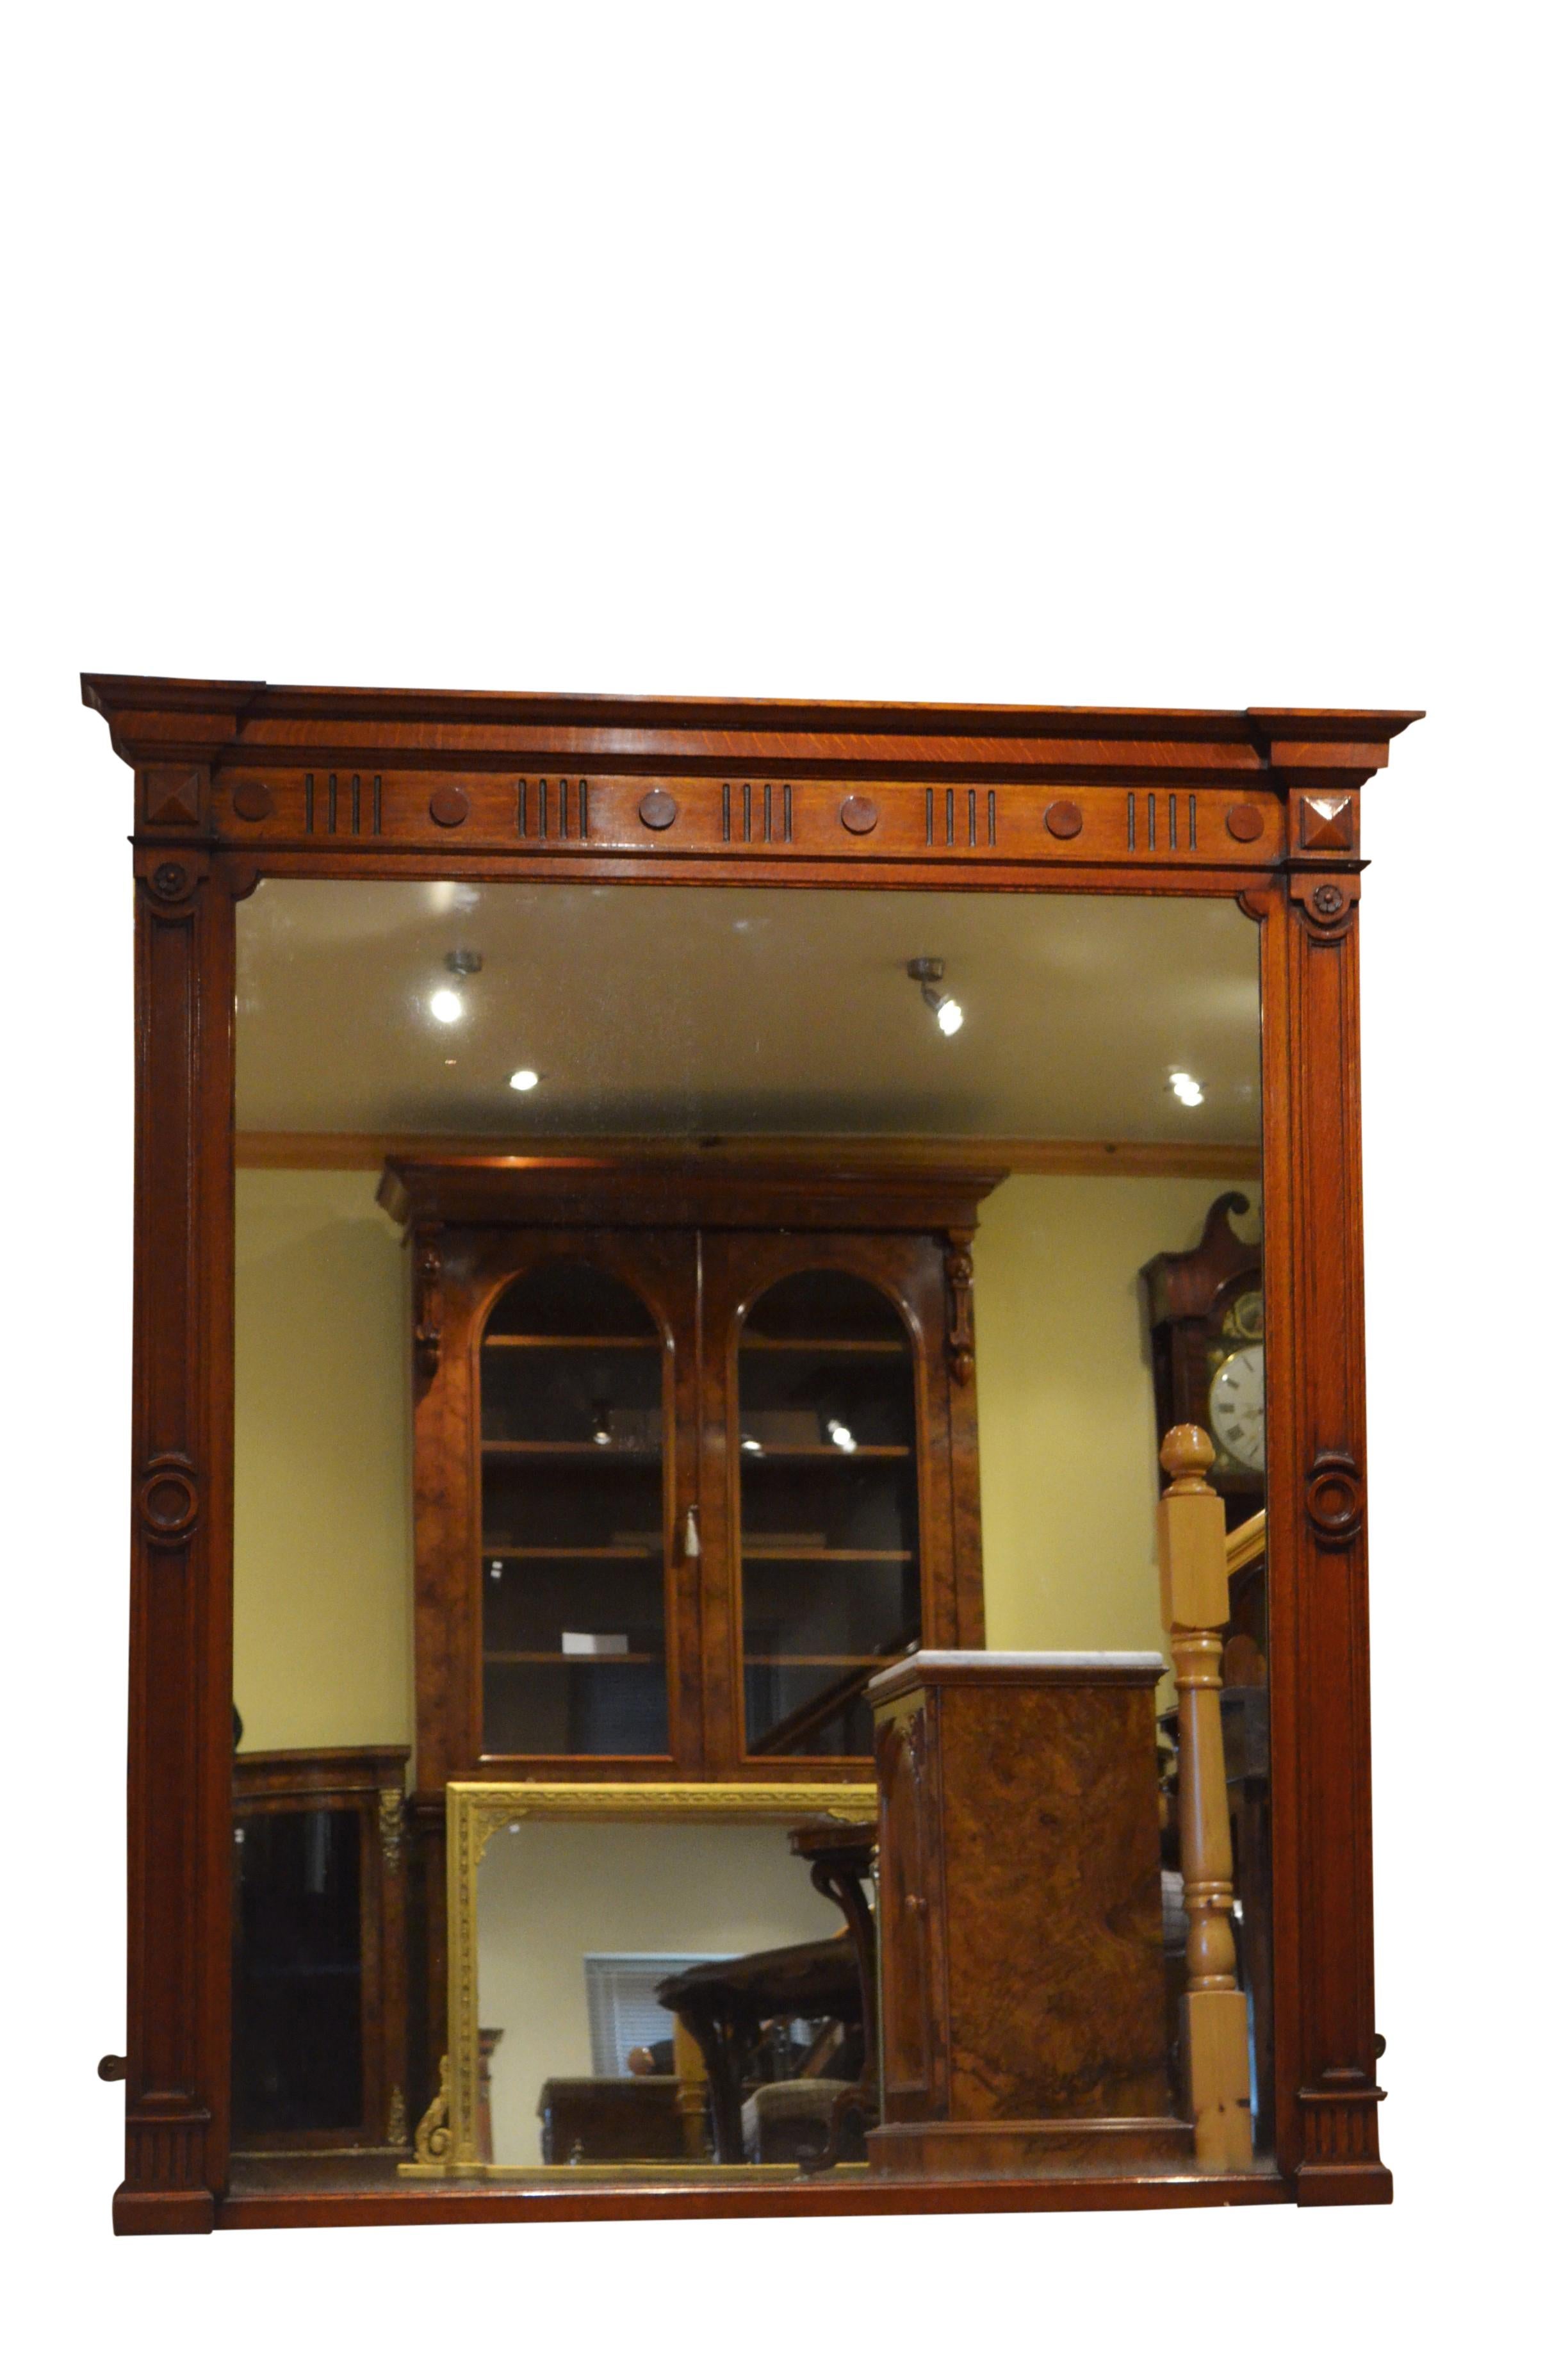 K0140 outstanding English wall mirror of large proportions, having original glass with some age related foxing, the frame having moulded cornice above reeded frieze applied with paterae and moulded pilasters with reeded capitols and flower carved